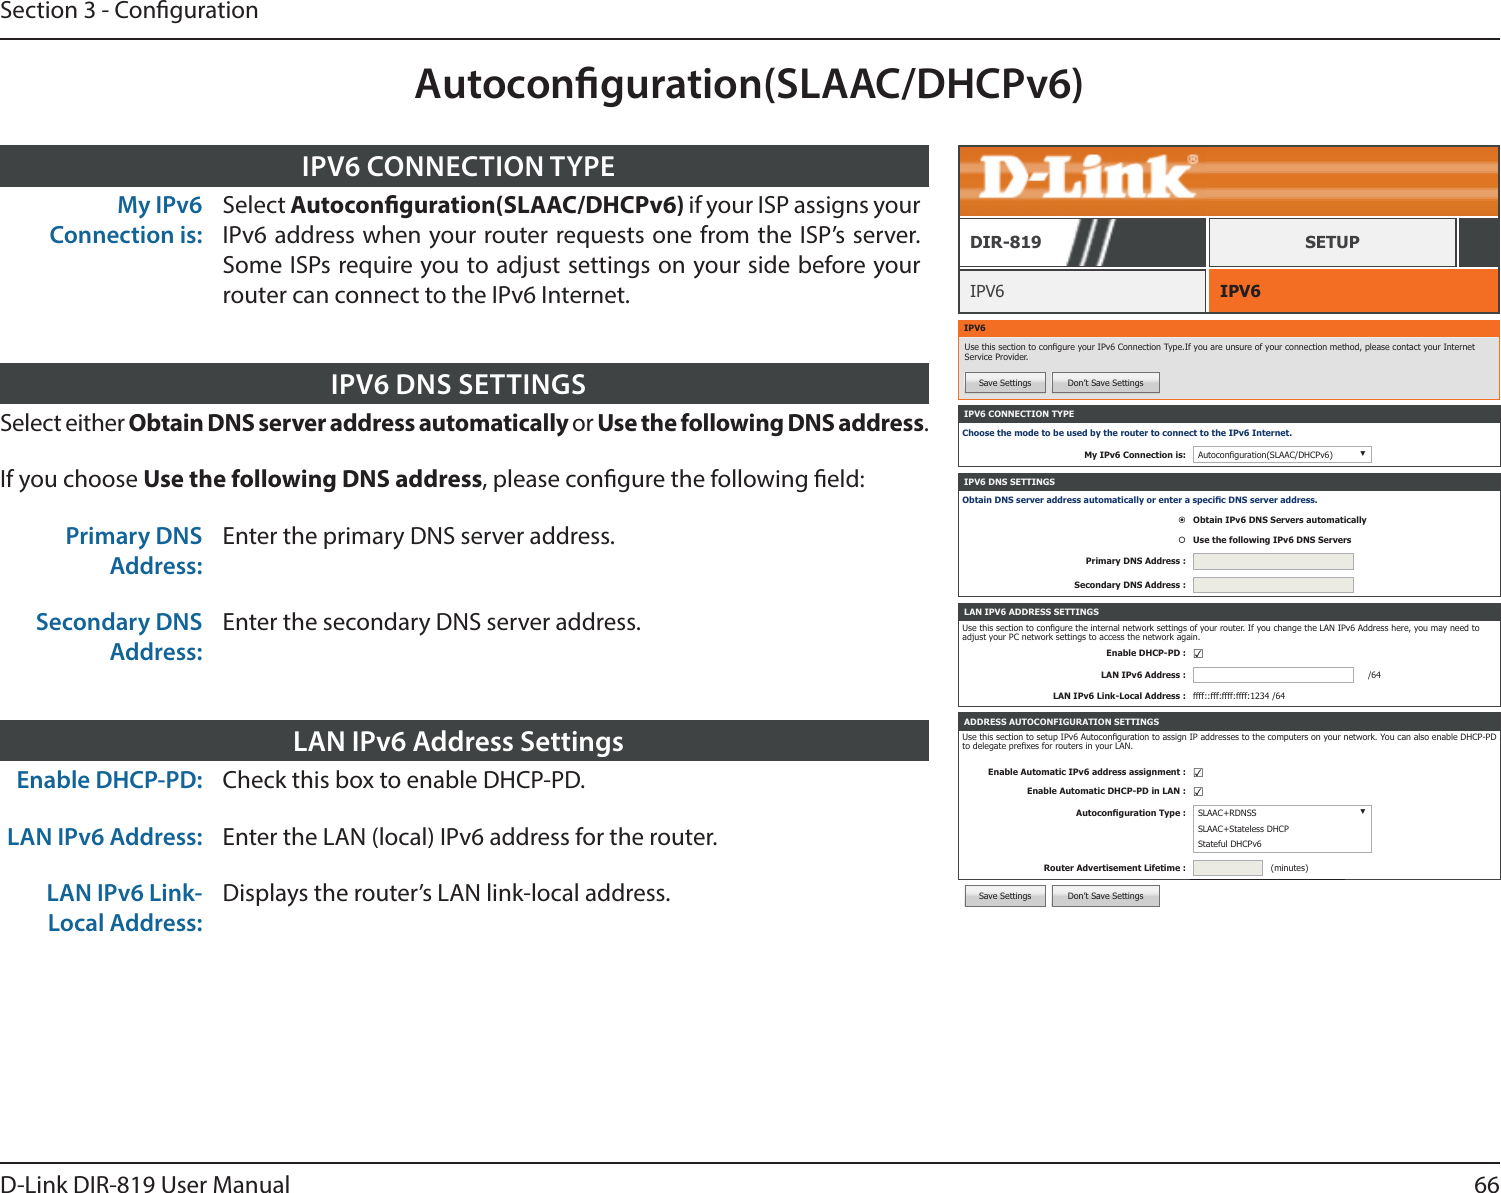 66D-Link DIR-819 User ManualSection 3 - CongurationAutoconguration(SLAAC/DHCPv6)IPV6 CONNECTION TYPEChoose the mode to be used by the router to connect to the IPv6 Internet.My IPv6 Connection is: Autoconguration(SLAAC/DHCPv6) ▼ADDRESS AUTOCONFIGURATION SETTINGSUse this section to setup IPv6 Autoconguration to assign IP addresses to the computers on your network. You can also enable DHCP-PD to delegate prexes for routers in your LAN.Enable Automatic IPv6 address assignment : ☑Enable Automatic DHCP-PD in LAN : ☑Autoconguration Type : SLAAC+RDNSS ▼SLAAC+Stateless DHCPStateful DHCPv6Router Advertisement Lifetime : (minutes)IPV6 DNS SETTINGSObtain DNS server address automatically or enter a specic DNS server address.Obtain IPv6 DNS Servers automaticallyUse the following IPv6 DNS ServersPrimary DNS Address :Secondary DNS Address :LAN IPV6 ADDRESS SETTINGSUse this section to congure the internal network settings of your router. If you change the LAN IPv6 Address here, you may need to adjust your PC network settings to access the network again.Enable DHCP-PD : ☑LAN IPv6 Address : /64LAN IPv6 Link-Local Address : ffff::fff:ffff:ffff:1234 /64IPV6 IPV6DIR-819 SETUPIPV6Use this section to congure your IPv6 Connection Type.If you are unsure of your connection method, please contact your Internet Service Provider.Save Settings Don’t Save SettingsSelect either Obtain DNS server address automatically or Use the following DNS address.If you choose Use the following DNS address, please congure the following eld:Primary DNS Address:Enter the primary DNS server address.Secondary DNS Address:Enter the secondary DNS server address.IPV6 DNS SETTINGSMy IPv6 Connection is:Select Autoconguration(SLAAC/DHCPv6) if your ISP assigns your IPv6 address when your router requests one from the ISP’s server. Some ISPs require you to adjust settings on your side before your router can connect to the IPv6 Internet.IPV6 CONNECTION TYPEEnable DHCP-PD: Check this box to enable DHCP-PD.LAN IPv6 Address: Enter the LAN (local) IPv6 address for the router.LAN IPv6 Link-Local Address:Displays the router’s LAN link-local address.LAN IPv6 Address SettingsSave Settings Don’t Save Settings